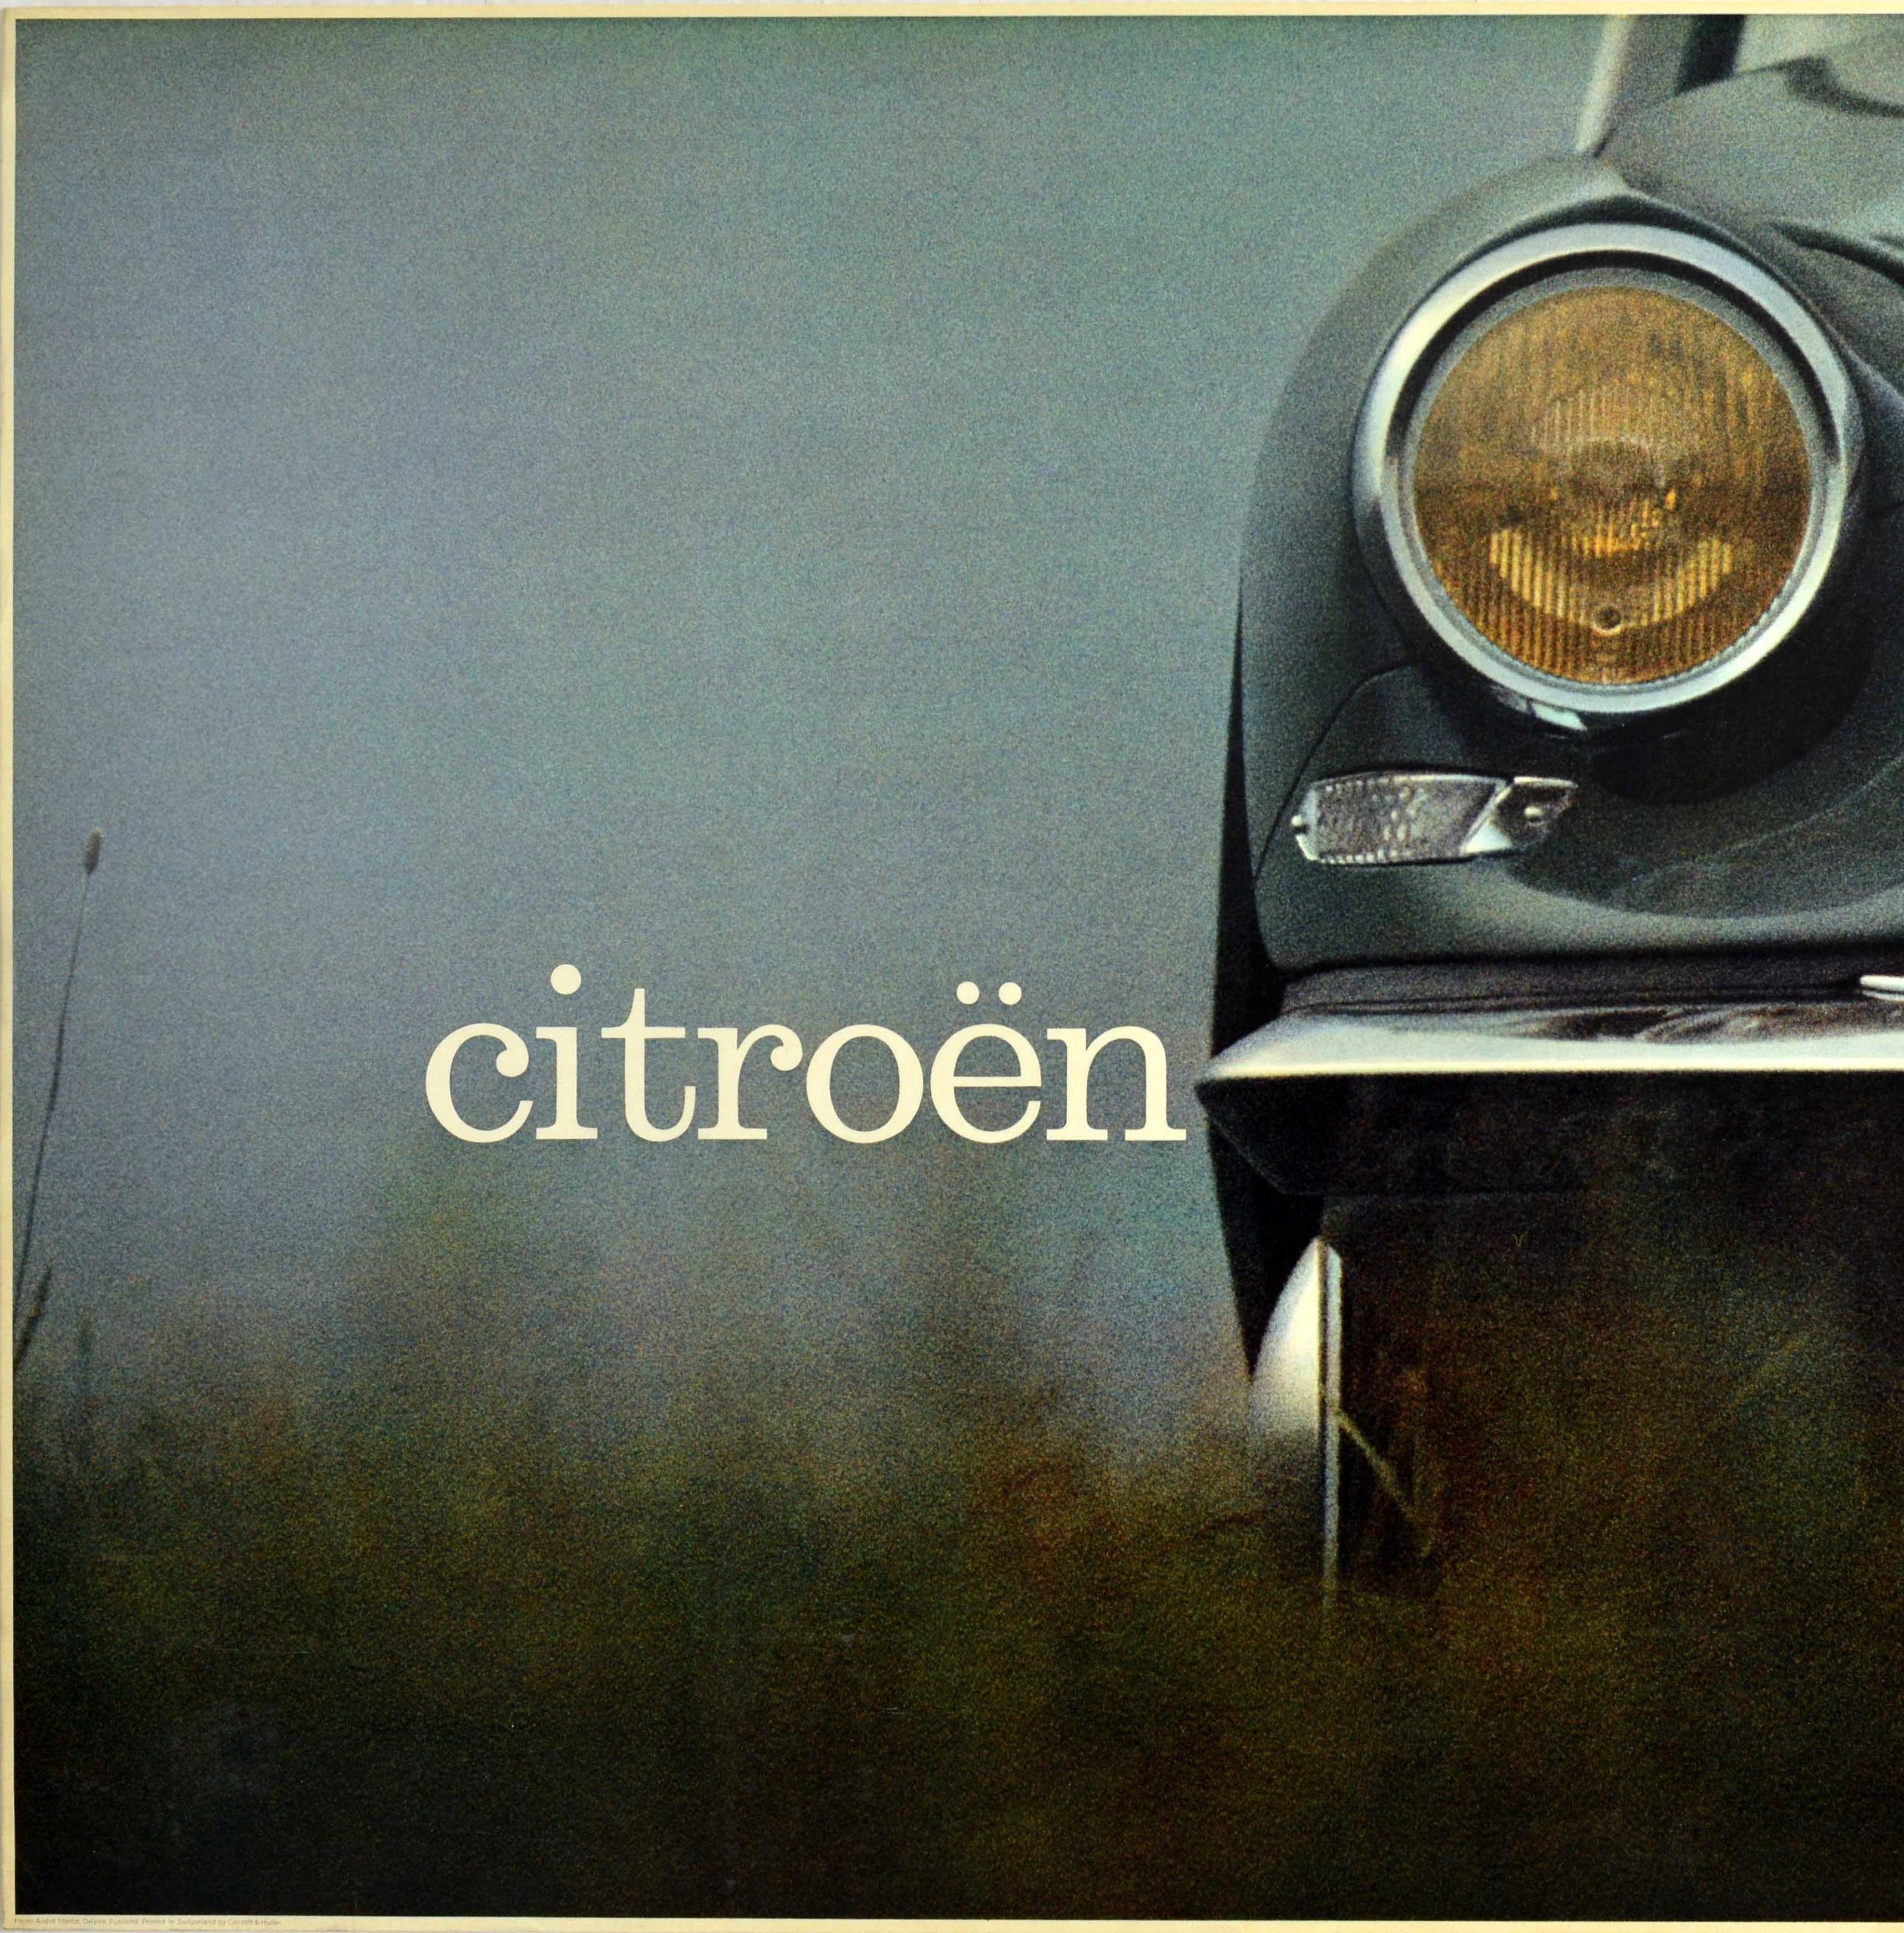 Original vintage car advertising poster issued by the French automobile manufacturer Citroen (founded 1919) featuring a great photograph of a 1960 Citroen DS showing a partial image of the front of the car with one yellow headlight and front grill